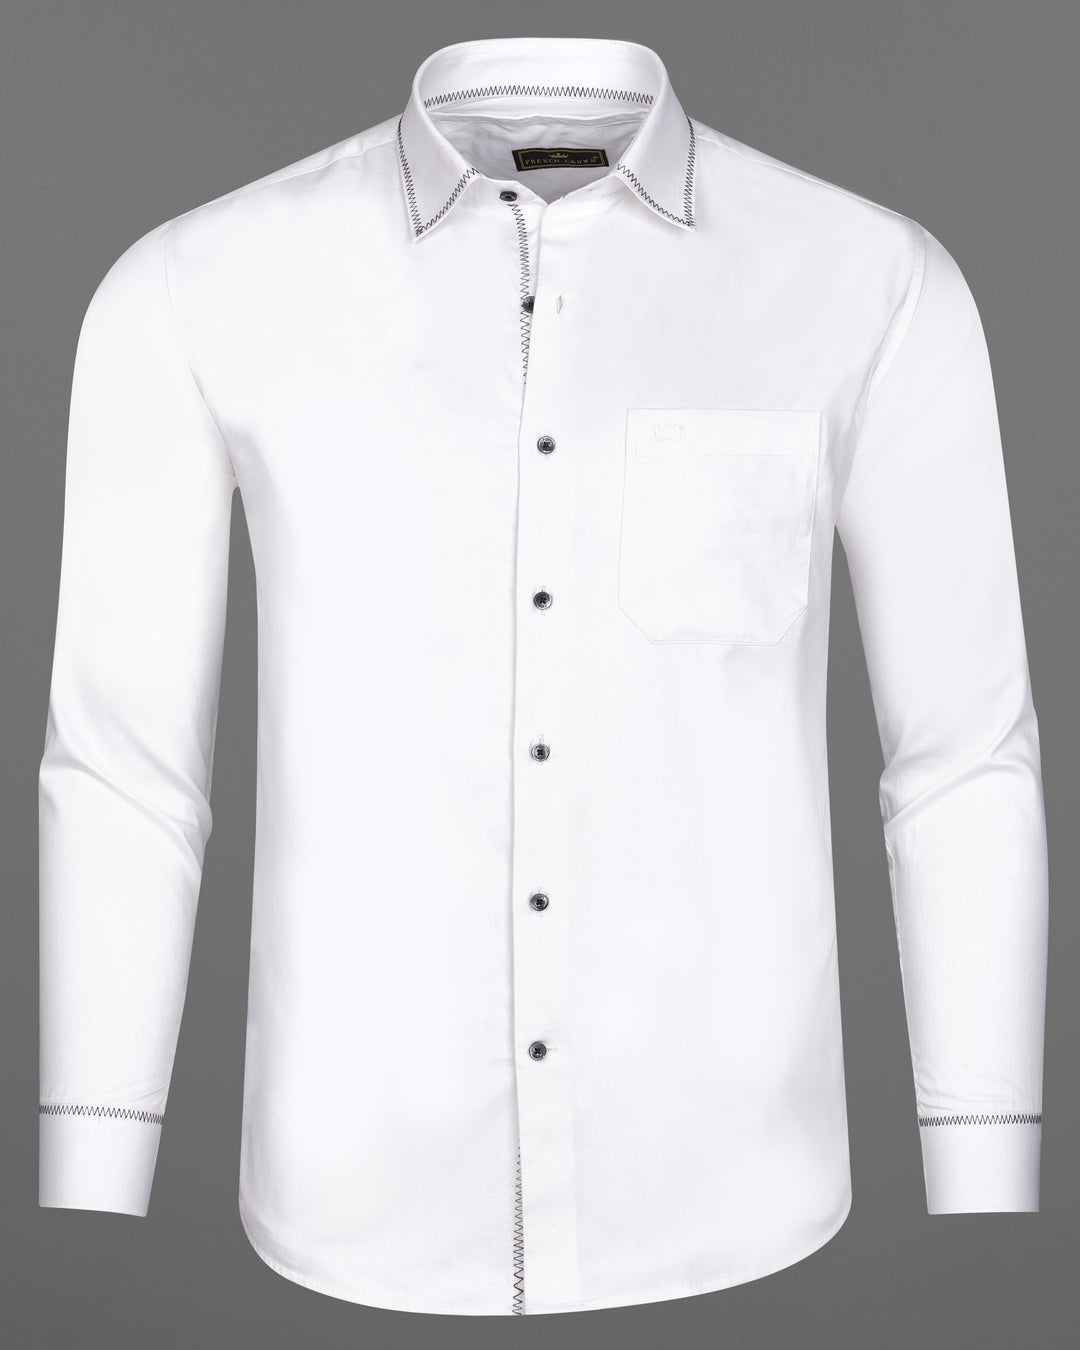 15 Perfect Matching Shirts for White Pants: Trending Combos